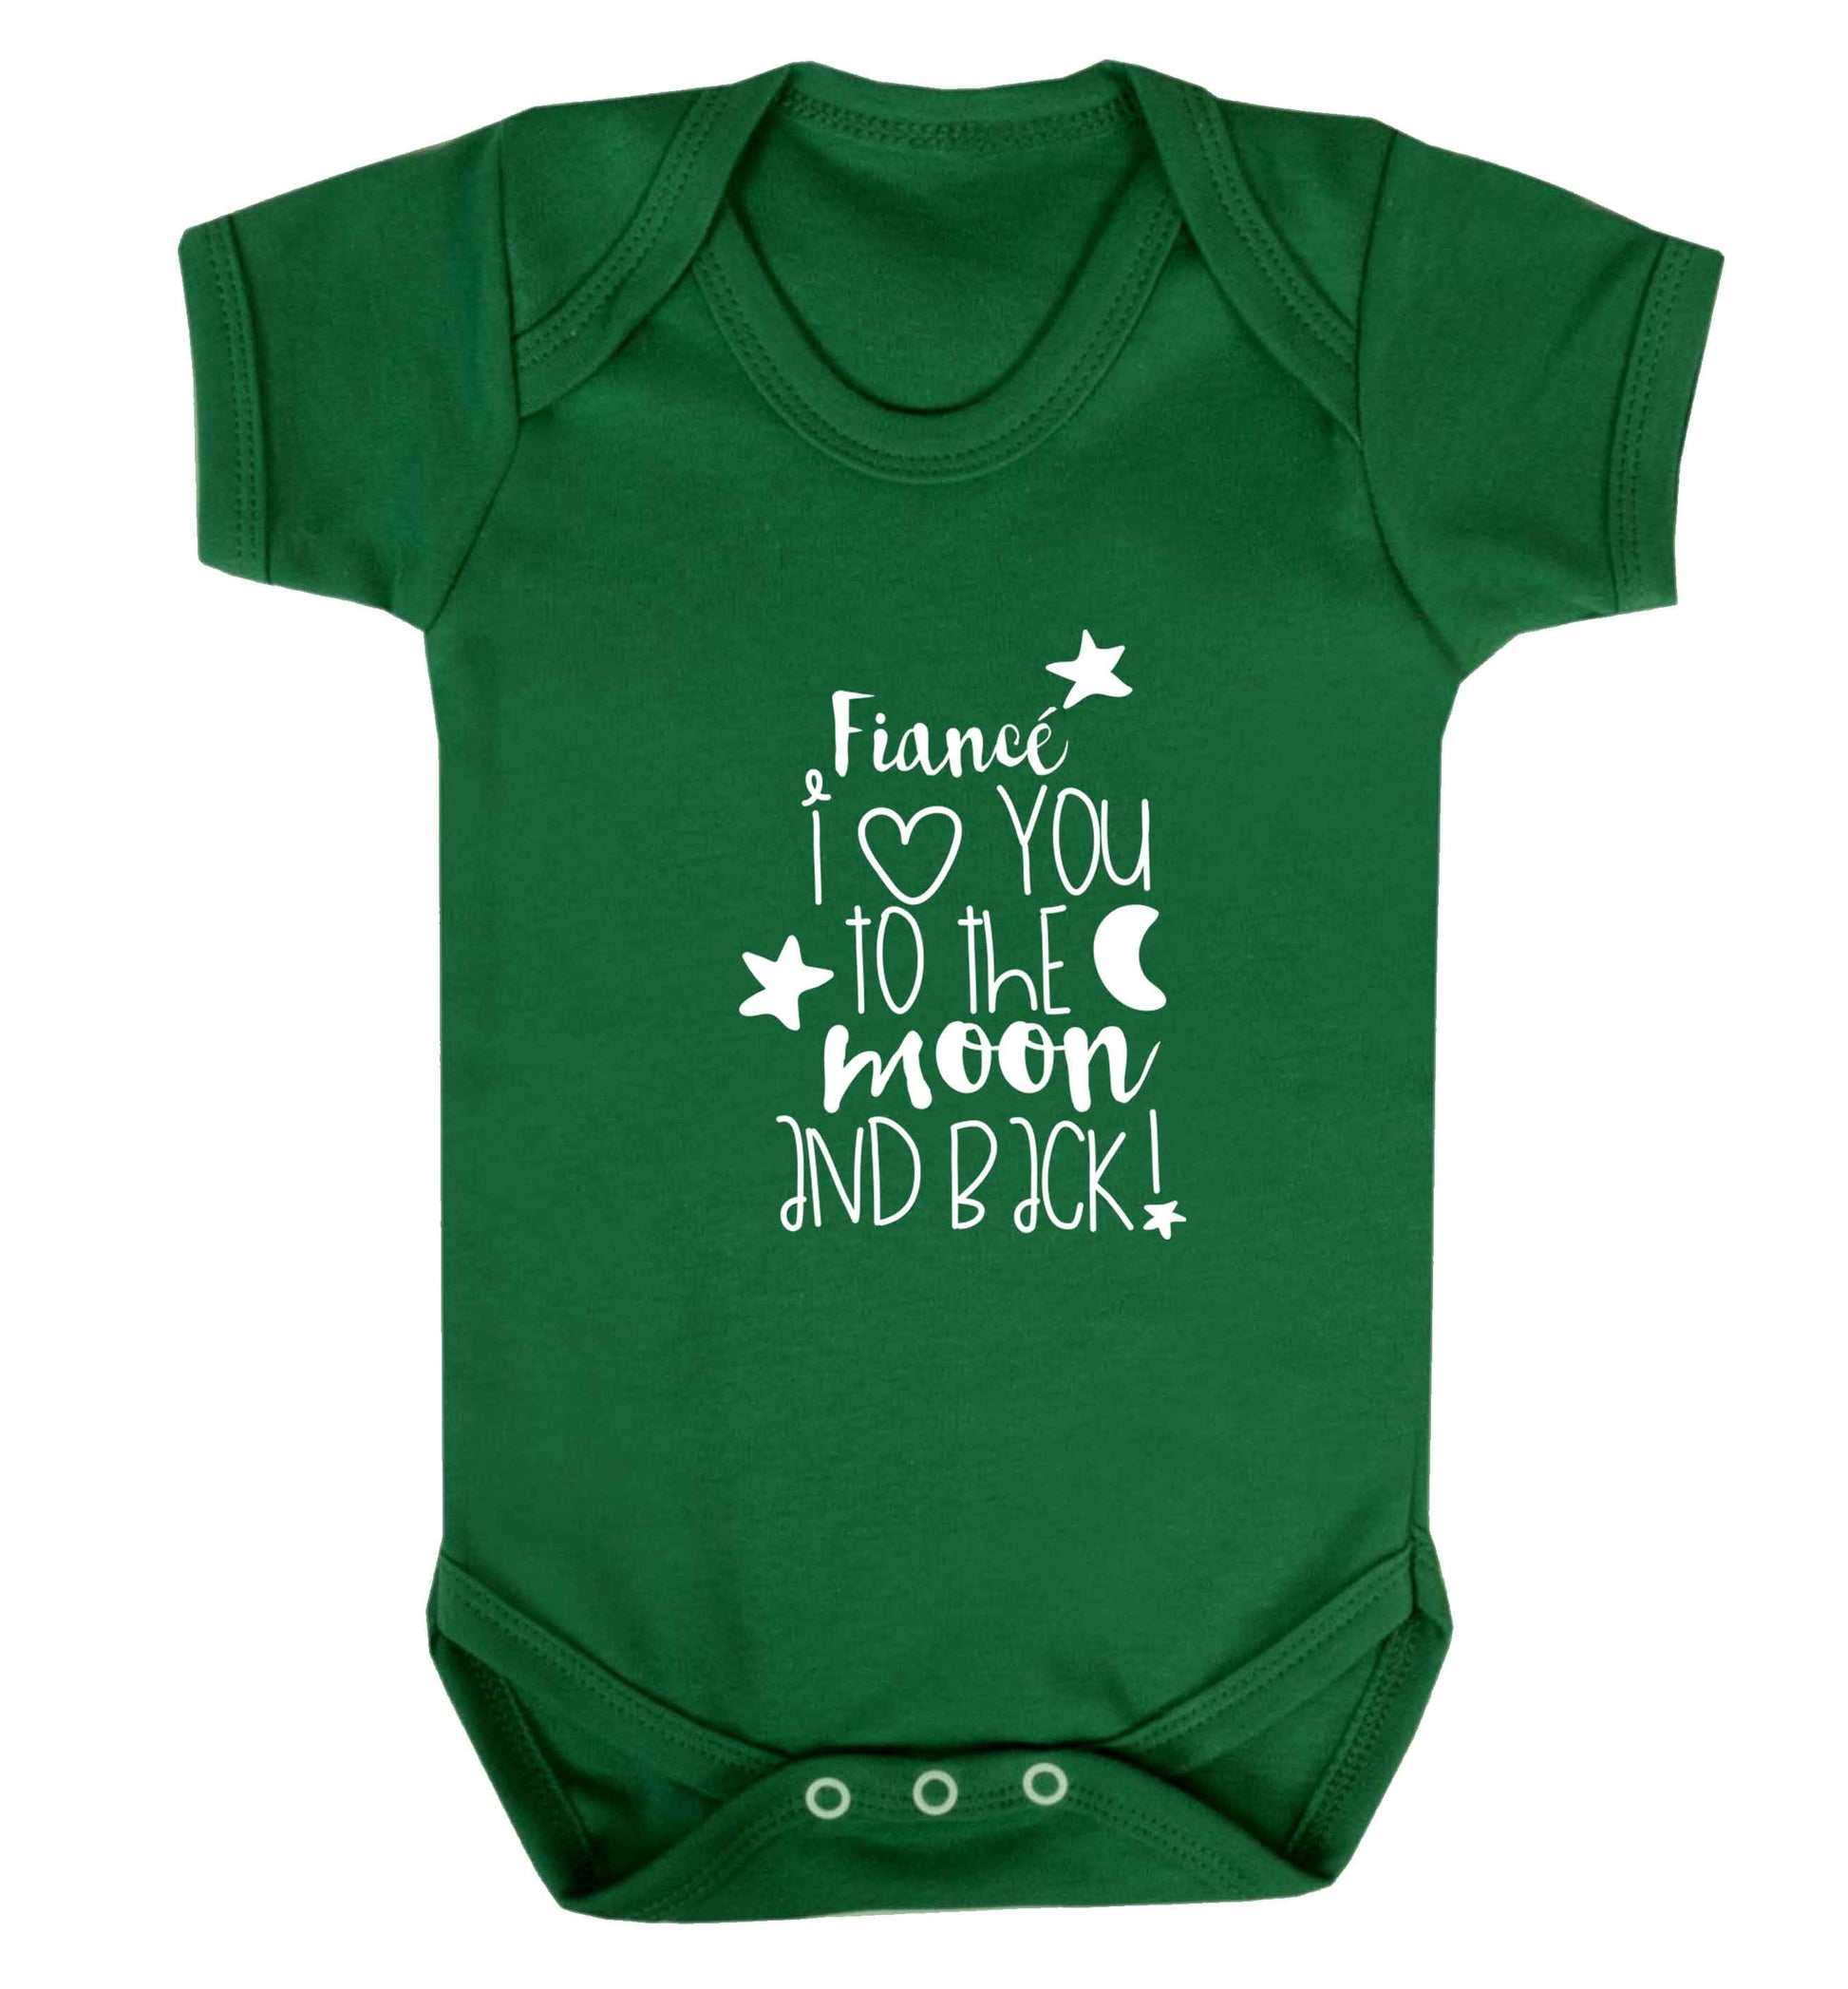 Fianc√© I love you to the moon and back baby vest green 18-24 months